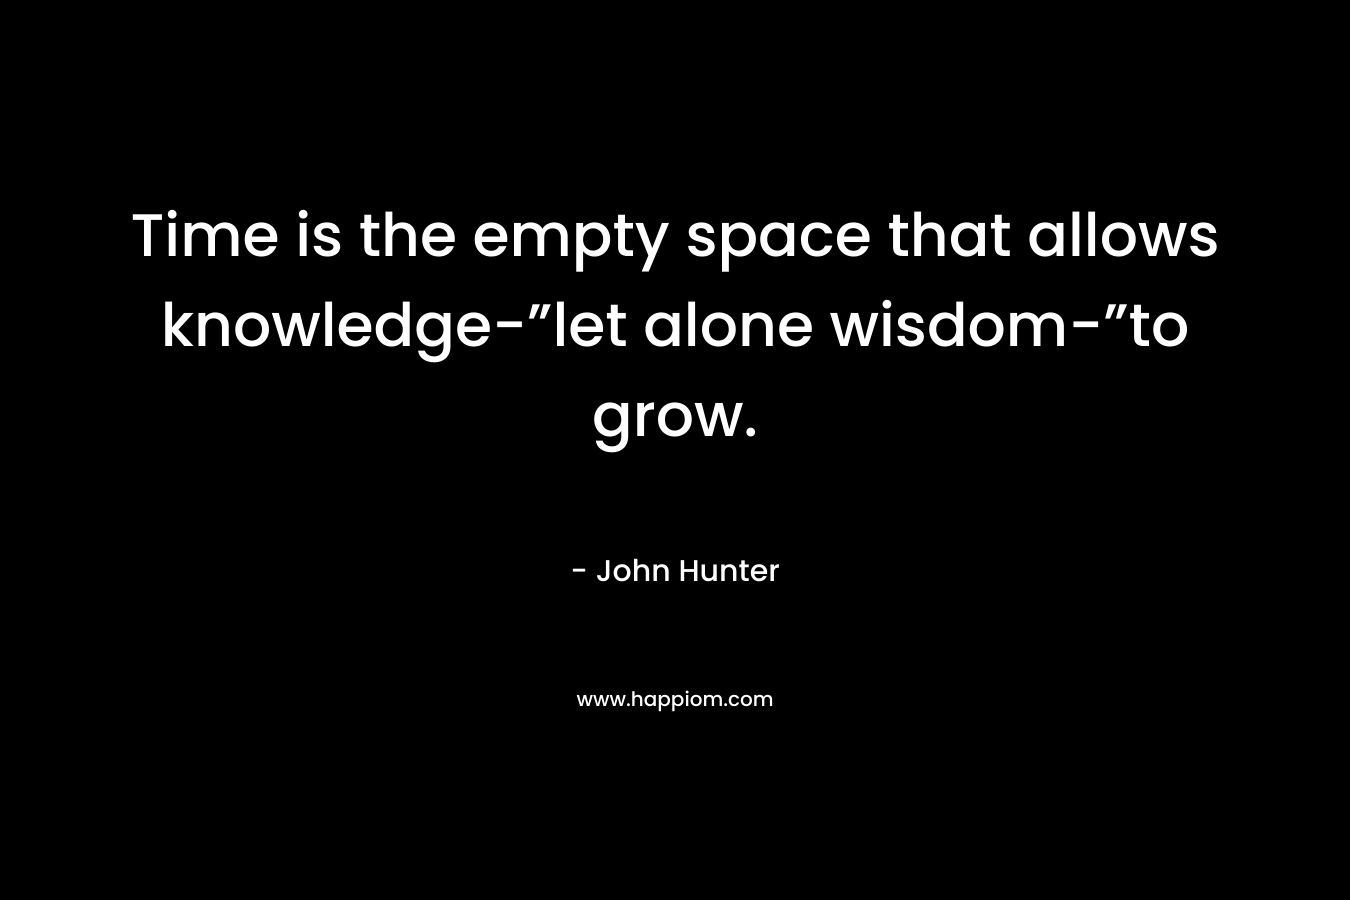 Time is the empty space that allows knowledge-”let alone wisdom-”to grow. – John Hunter